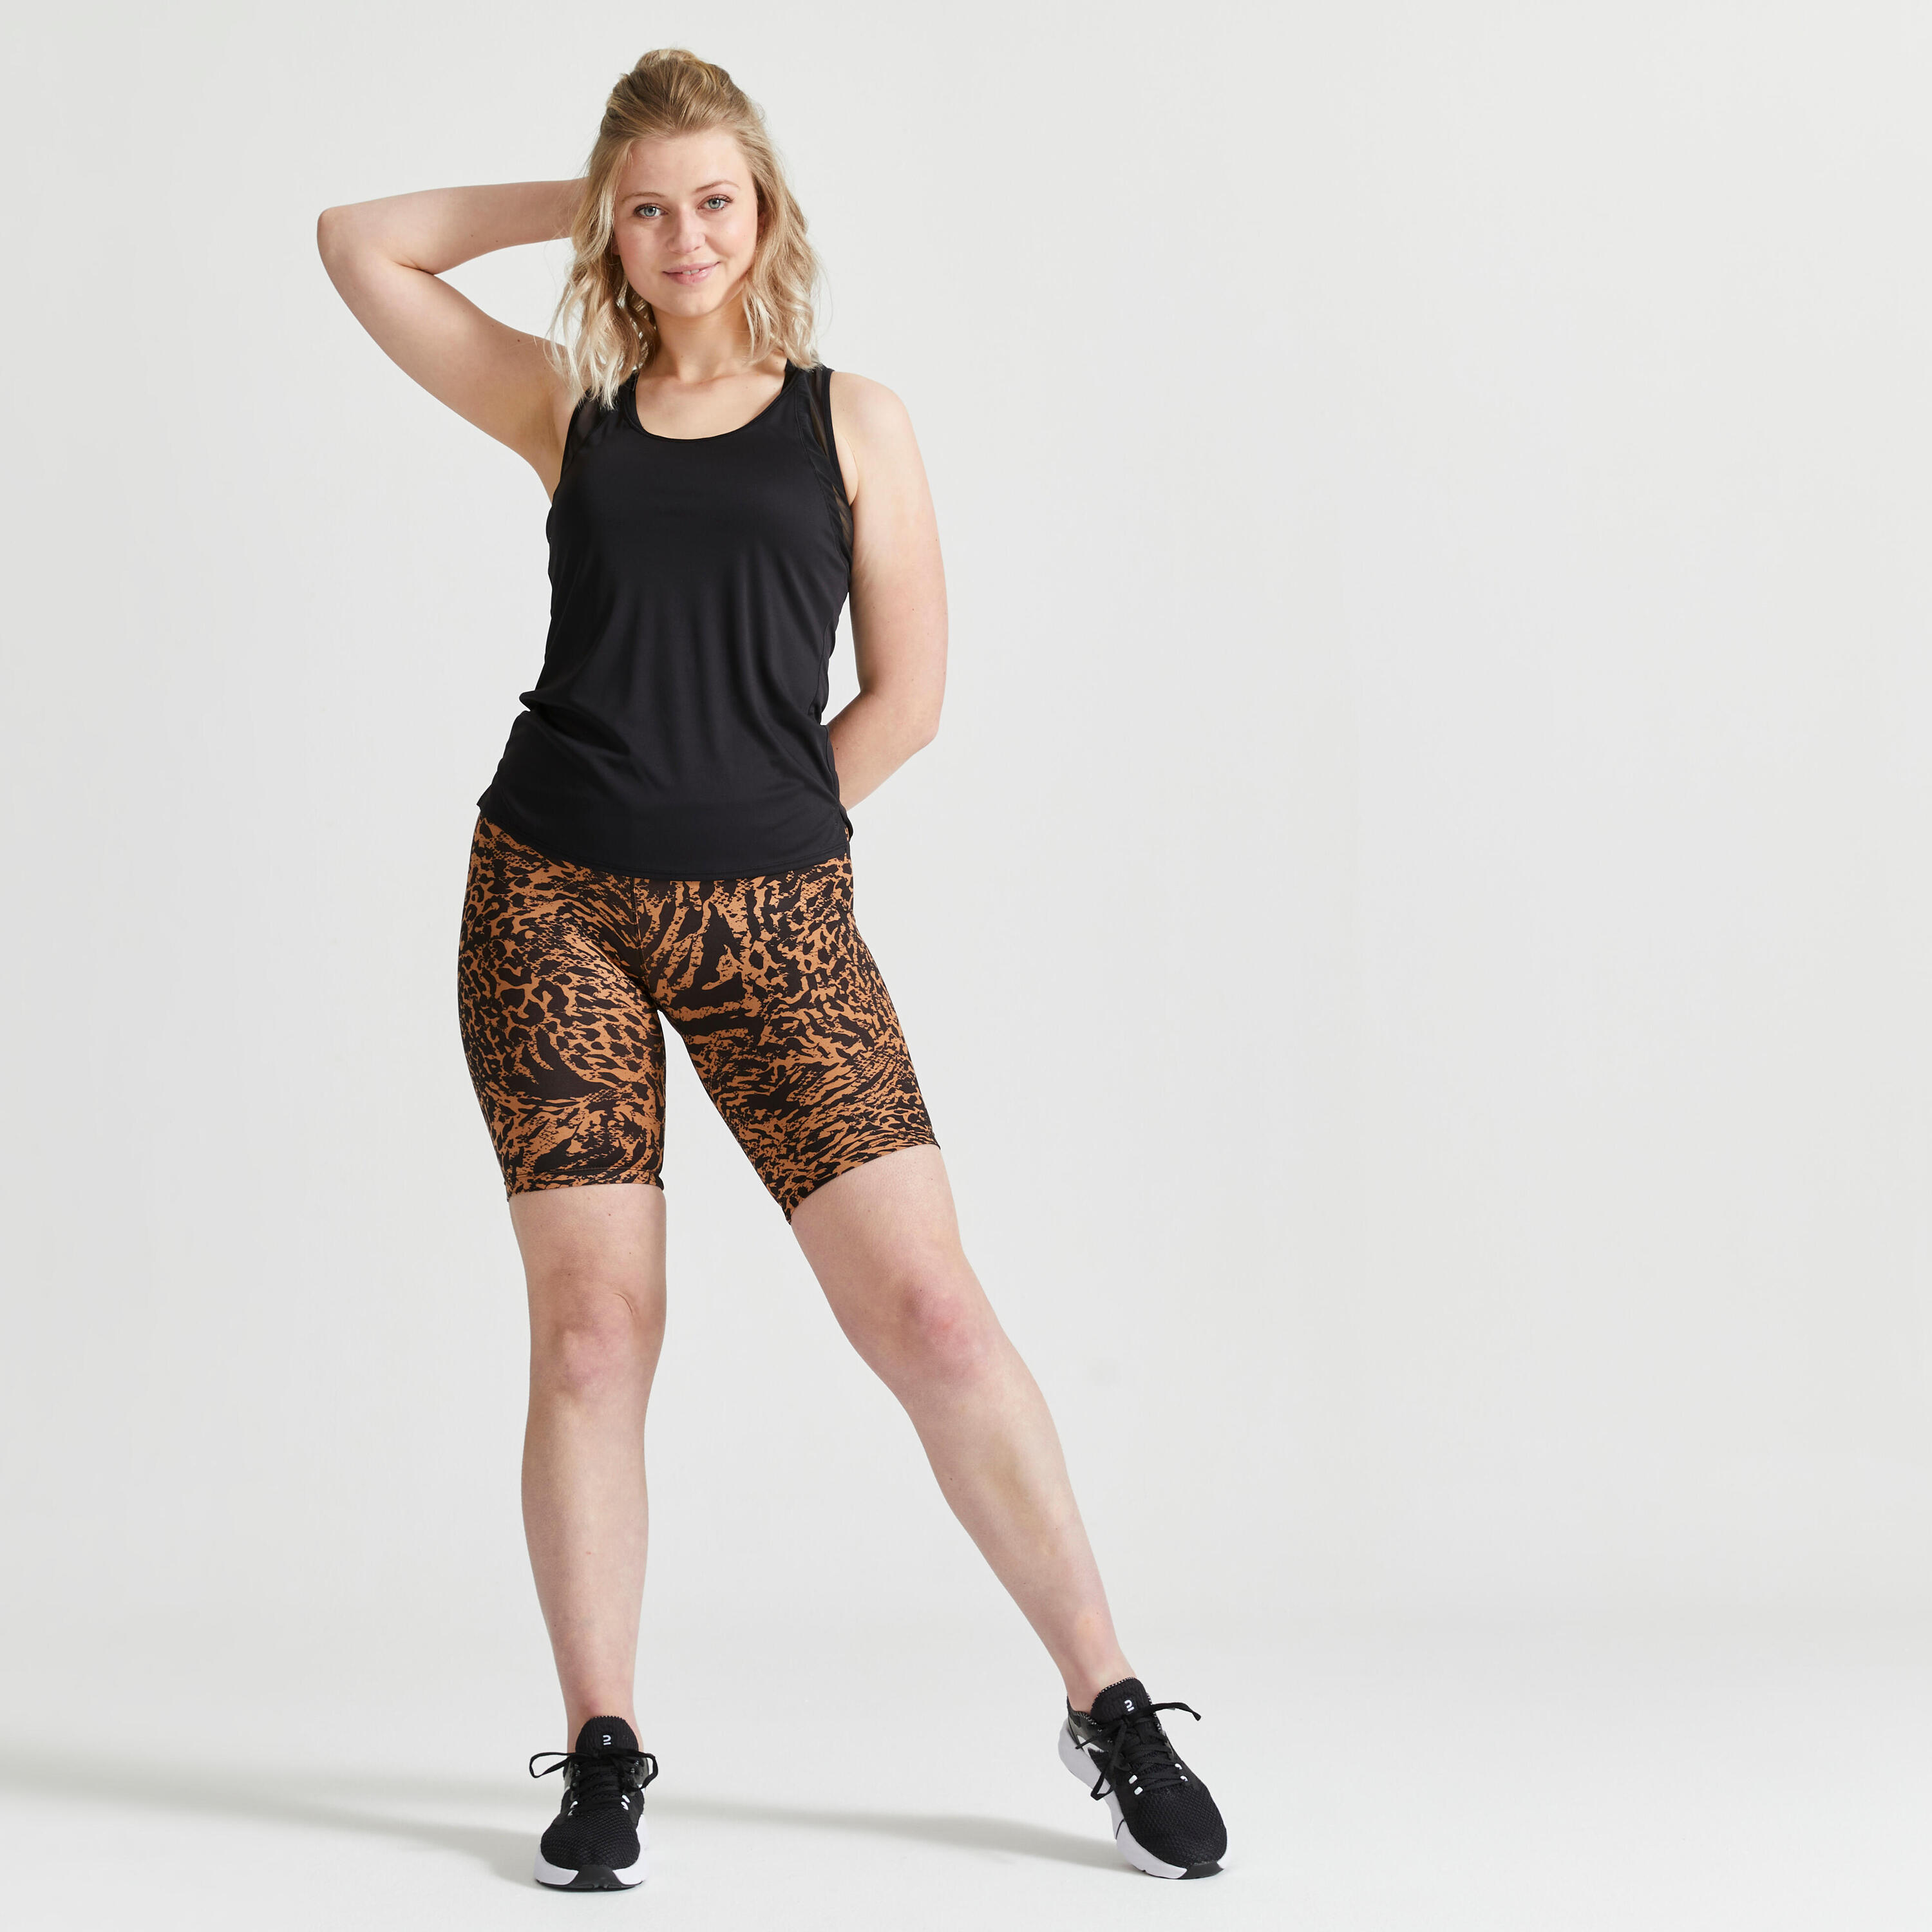 Women's High-Waisted Cardio Fitness Cycling Shorts - Leopard Print 2/4